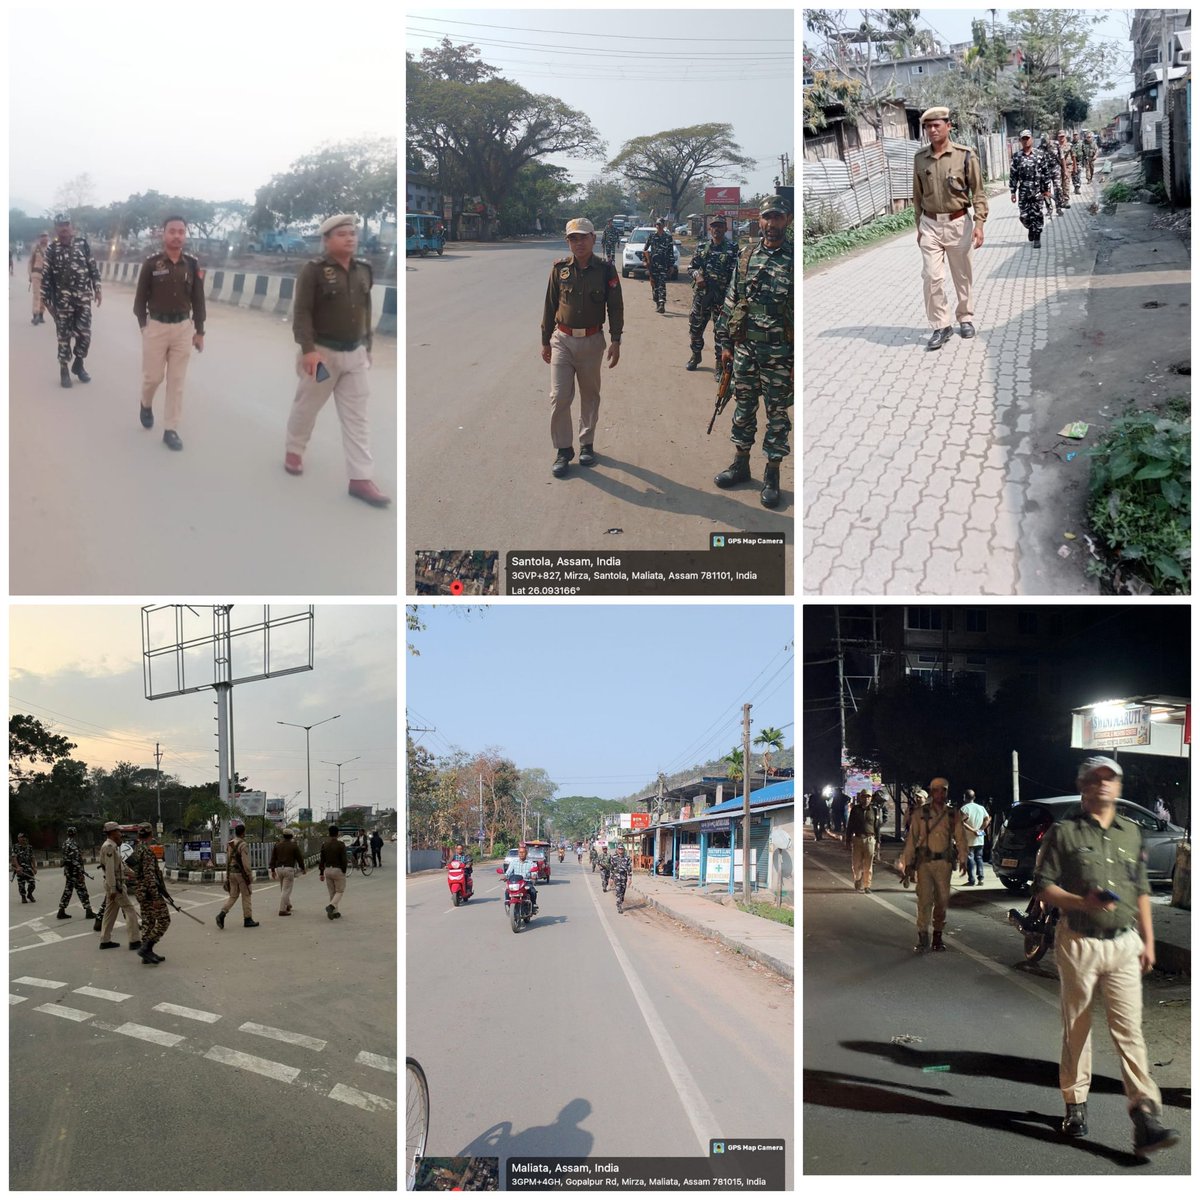 Kamrup Police conducted Area Domination & Foot Patrolling in collaboration with CRPF to ensure maintenance of Law & Order situation in the District. @assampolice @gpsinghips @CMOfficeAssam